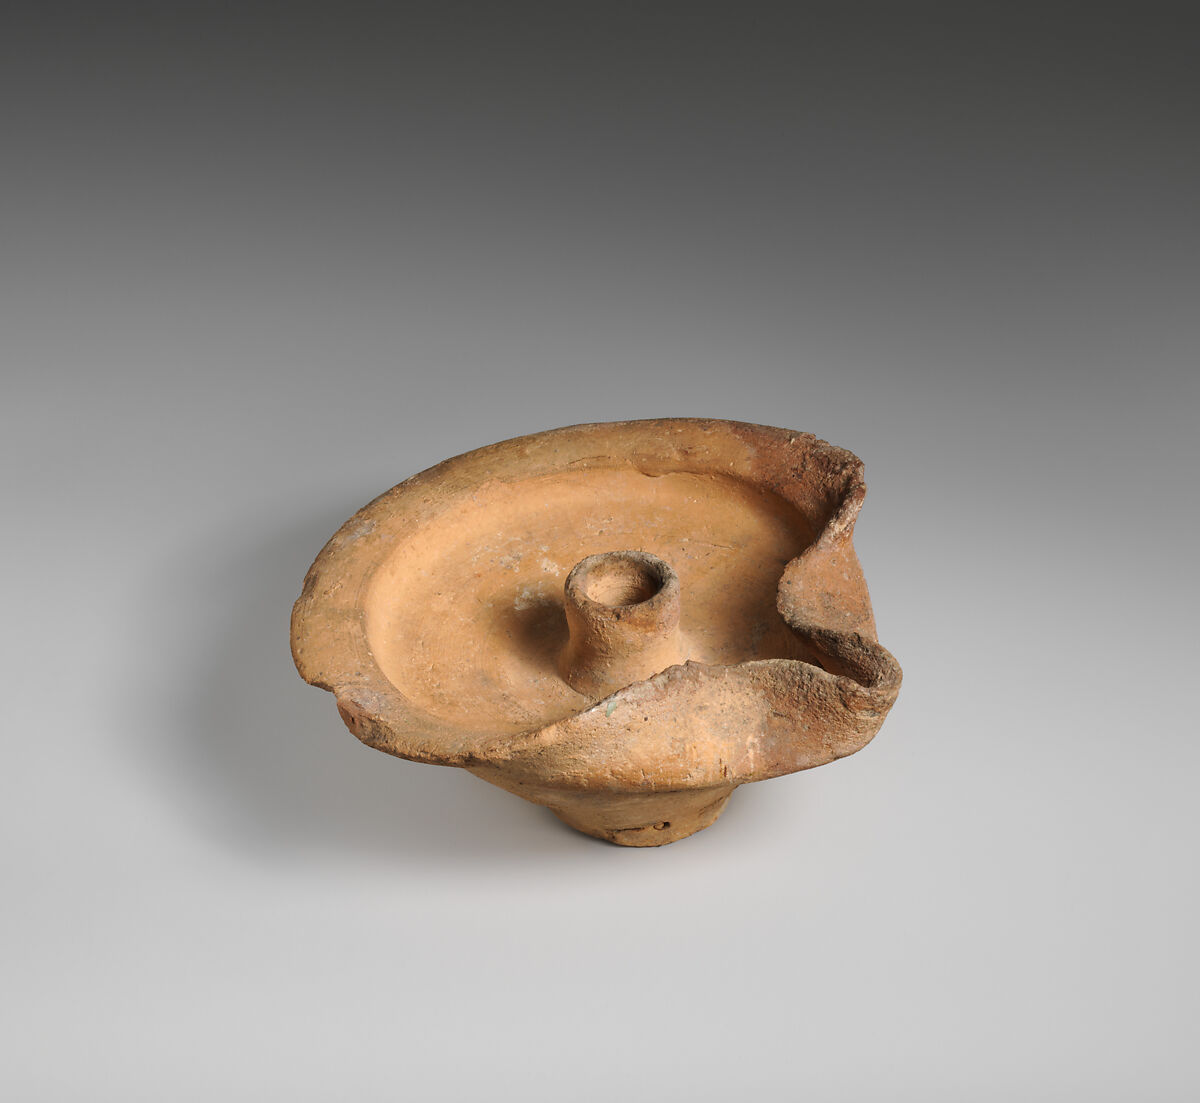 Terracotta saucer-shaped lamp, Terracotta, Cypriot 